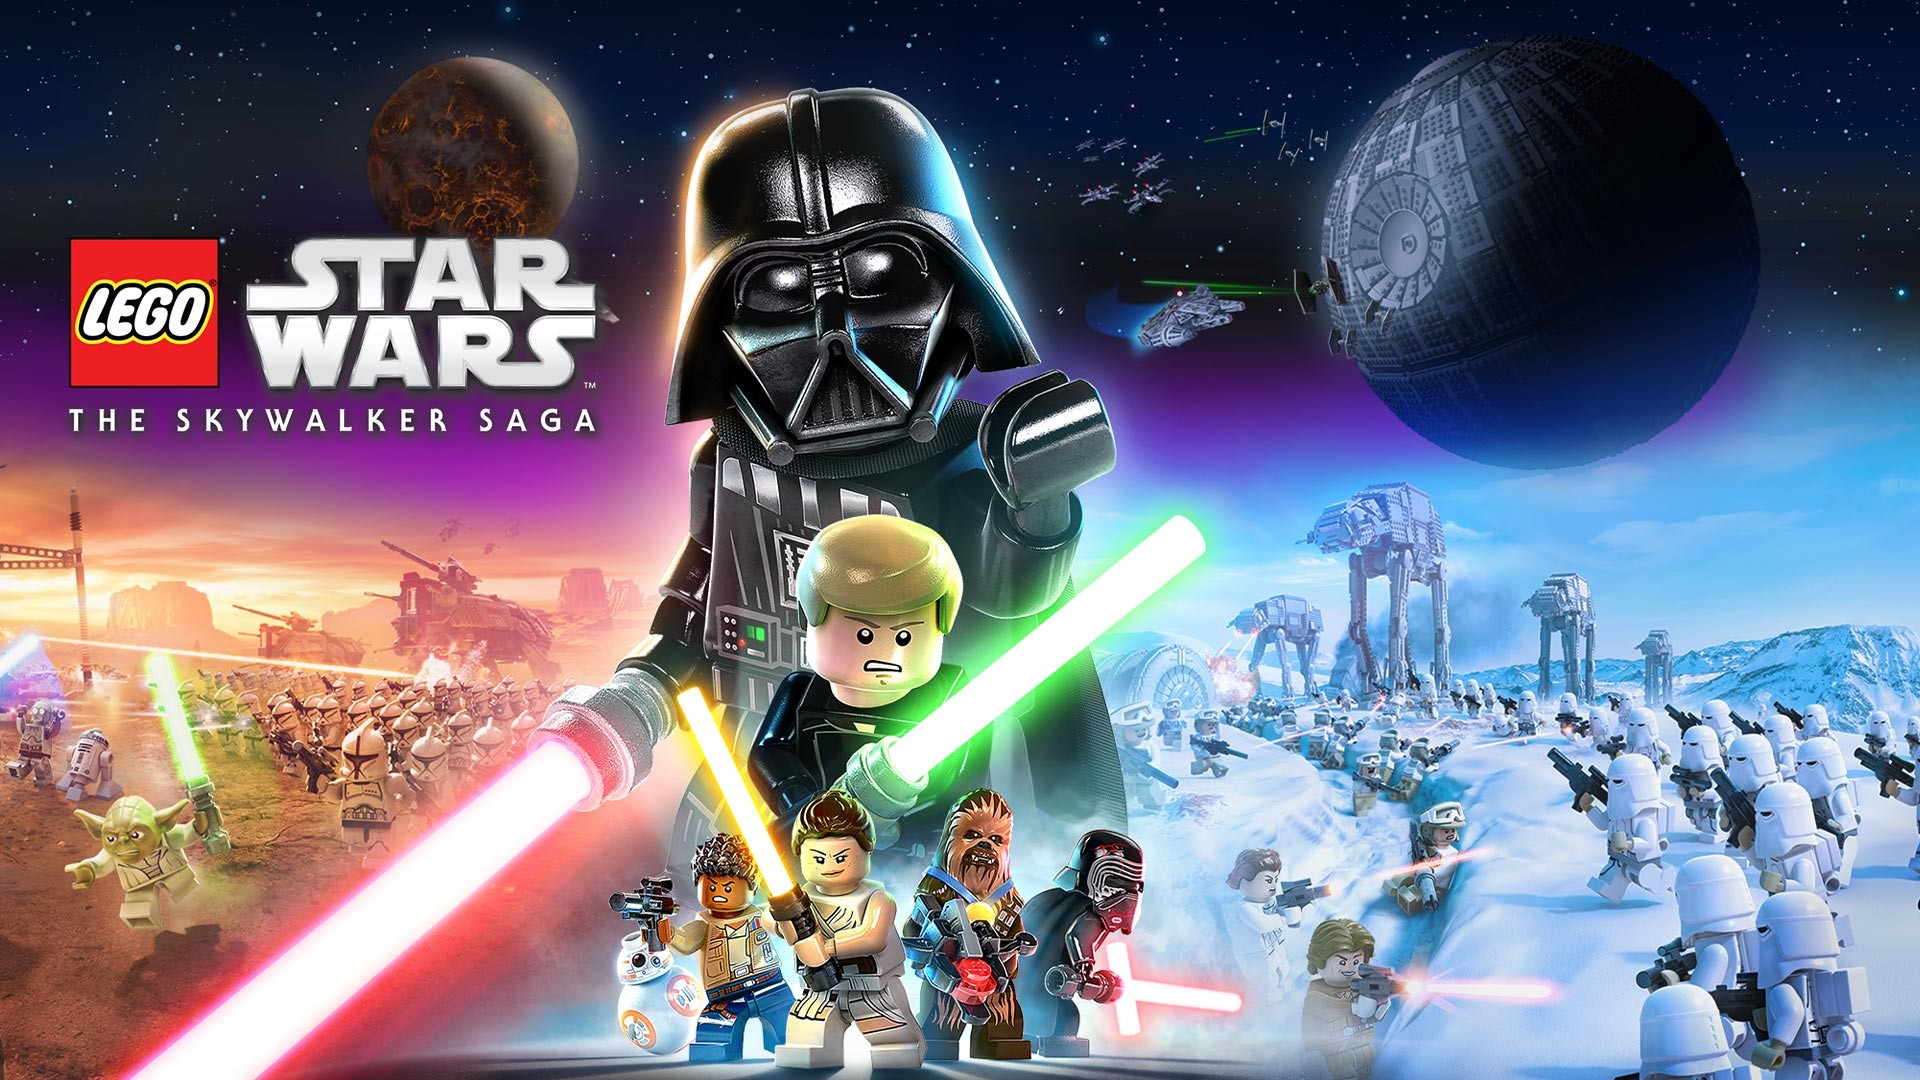 LEGO Star Wars: The Skywalker Saga Sets Record As The Biggest Global LEGO Game Launch